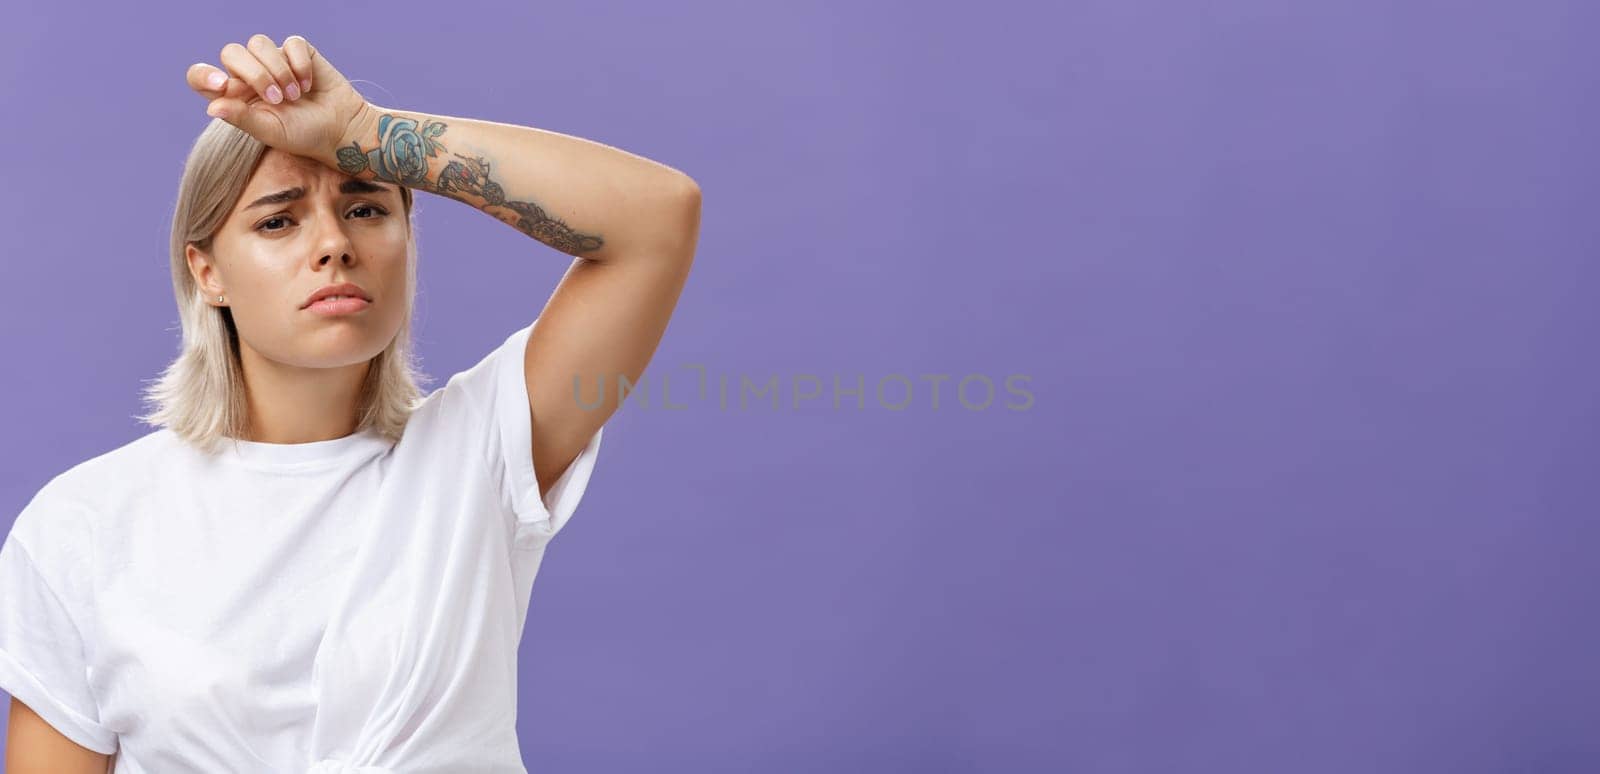 Lifestyle. Indoor shot of tired and displeased exhausted cute european woman with tanned skin and tattoos on arms holding hand on forehead frowning suffering from tiresome work or sun heating over purple wall..